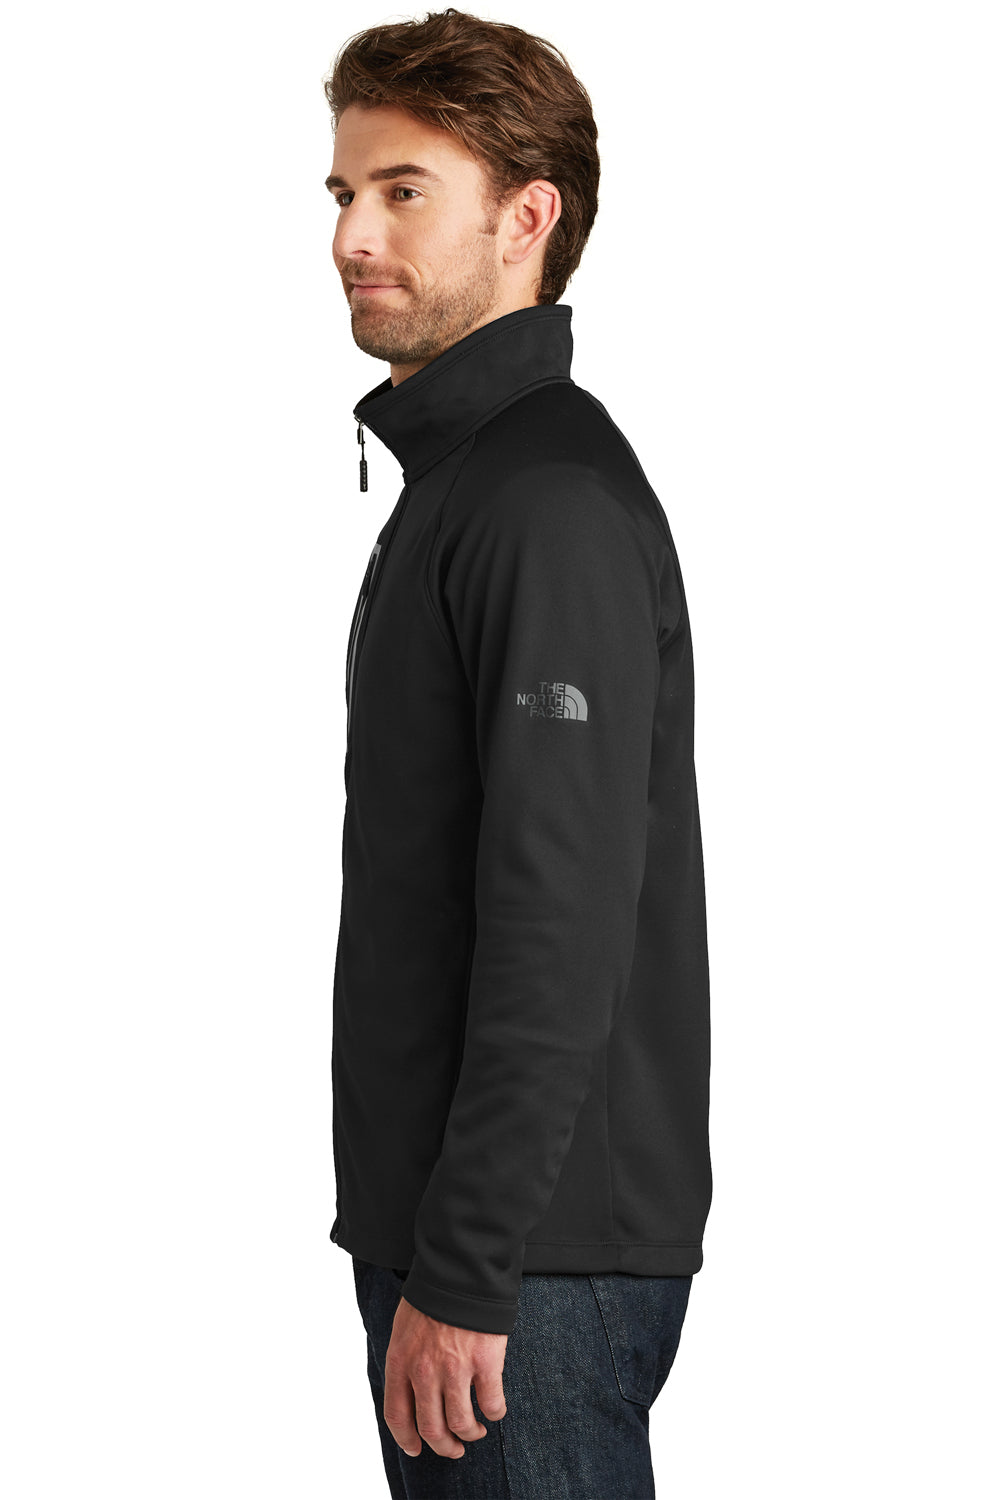 The North Face NF0A3LH9 Mens Canyon Flats Full Zip Fleece Jacket Black Side